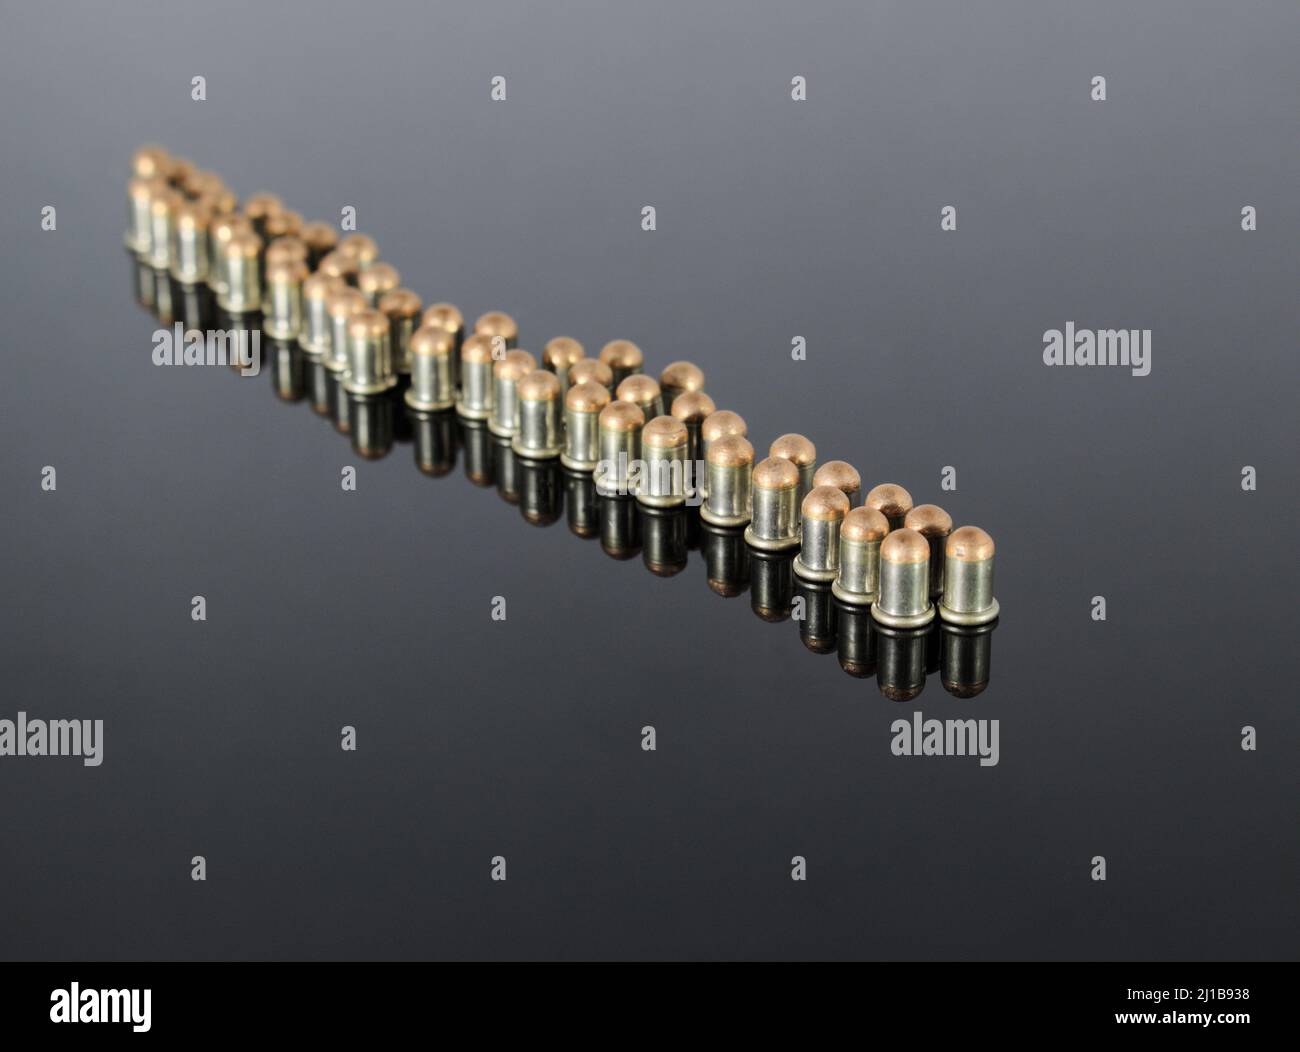 Ammunition .22 BB Cup  Bullet on a mirrored background Stock Photo